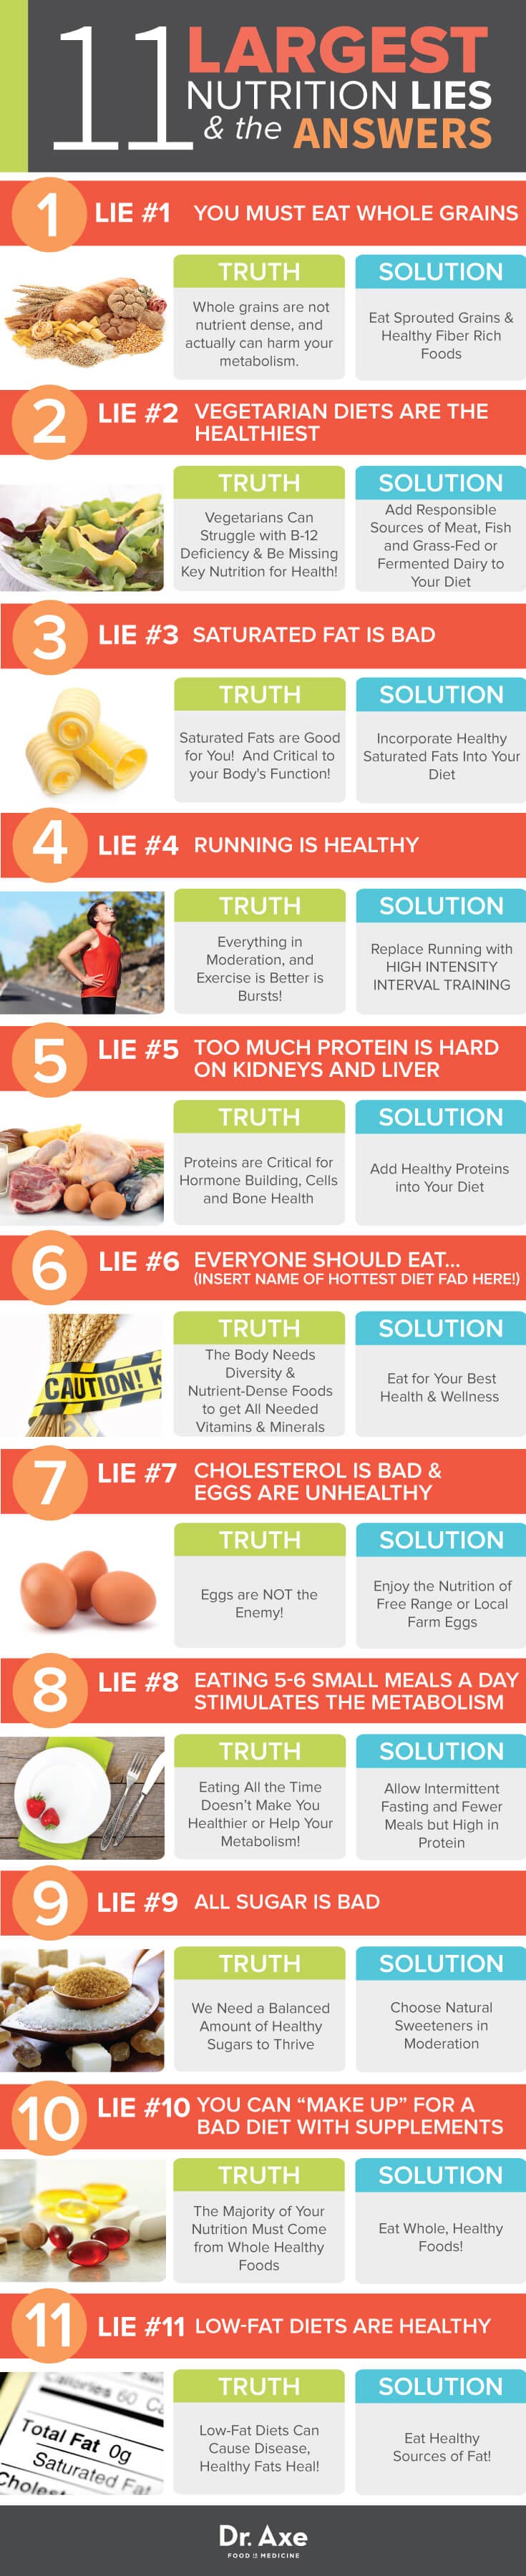 Nutrition-Lies-infographic